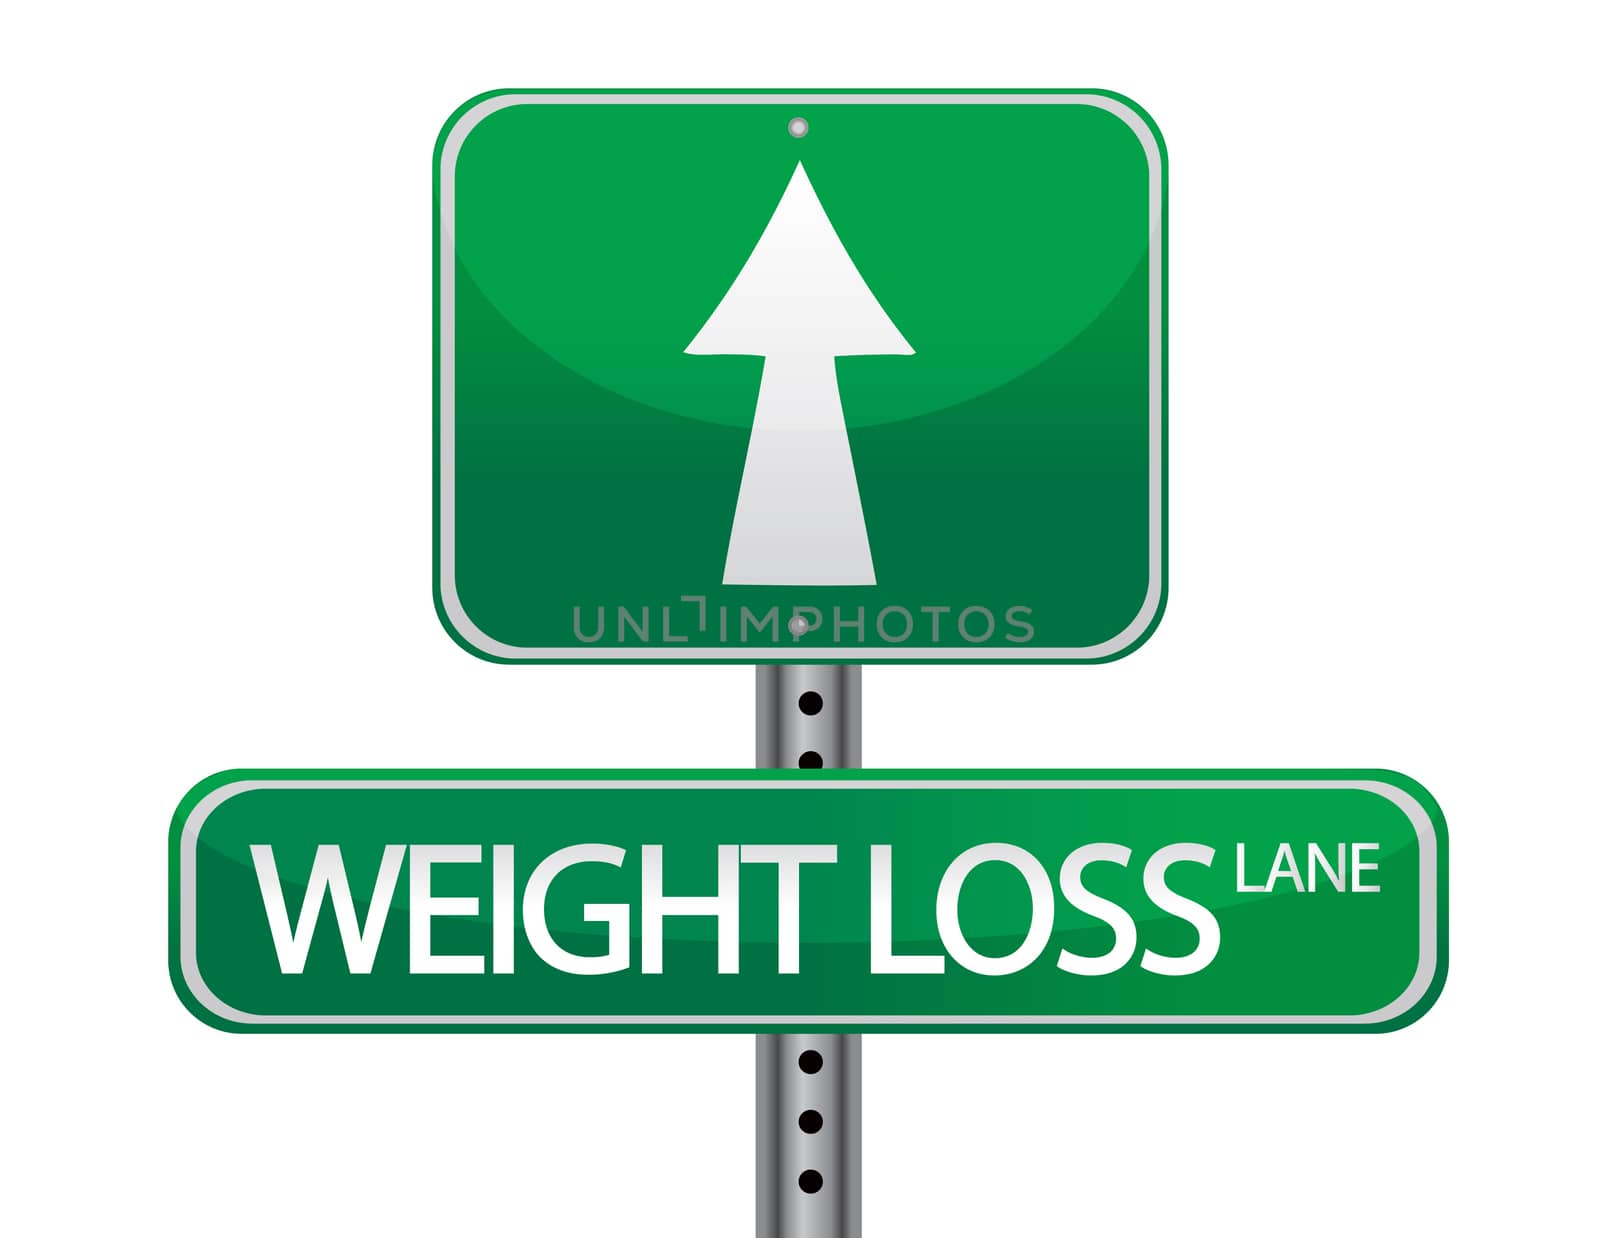 Weight loss green sign isolated over a white background.